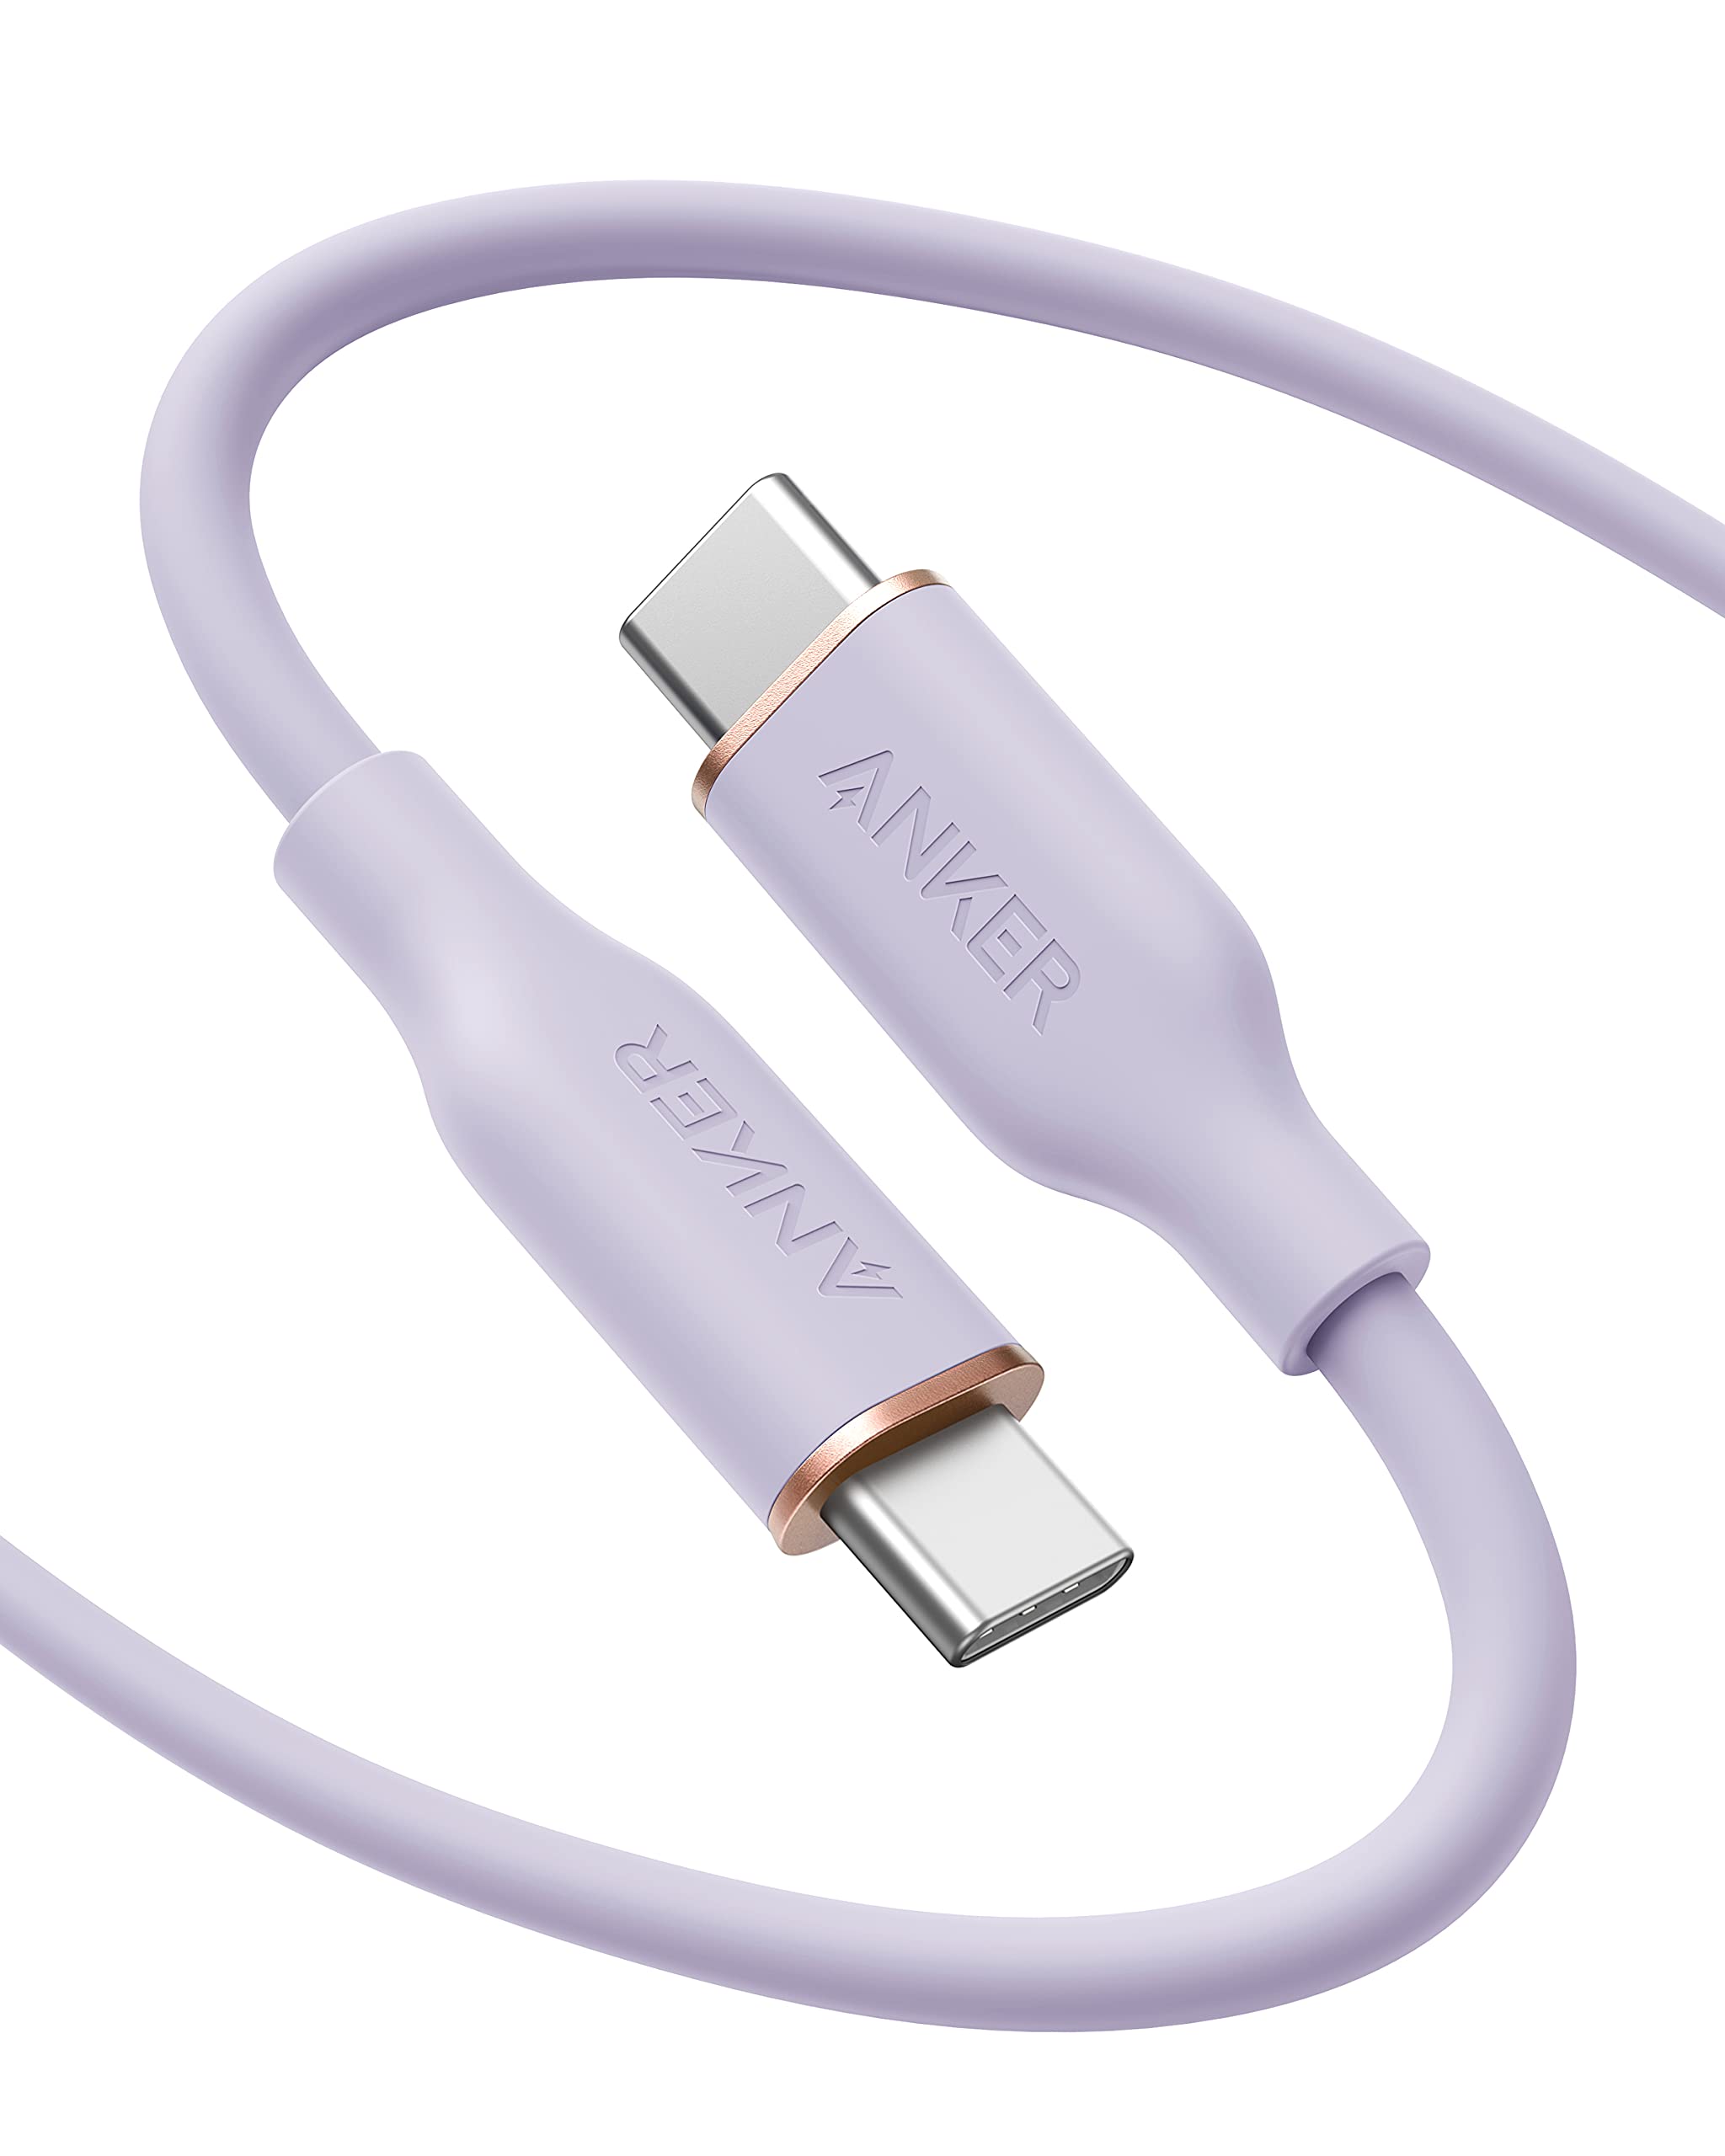 Anker 541 USB-C to USB-C Cable